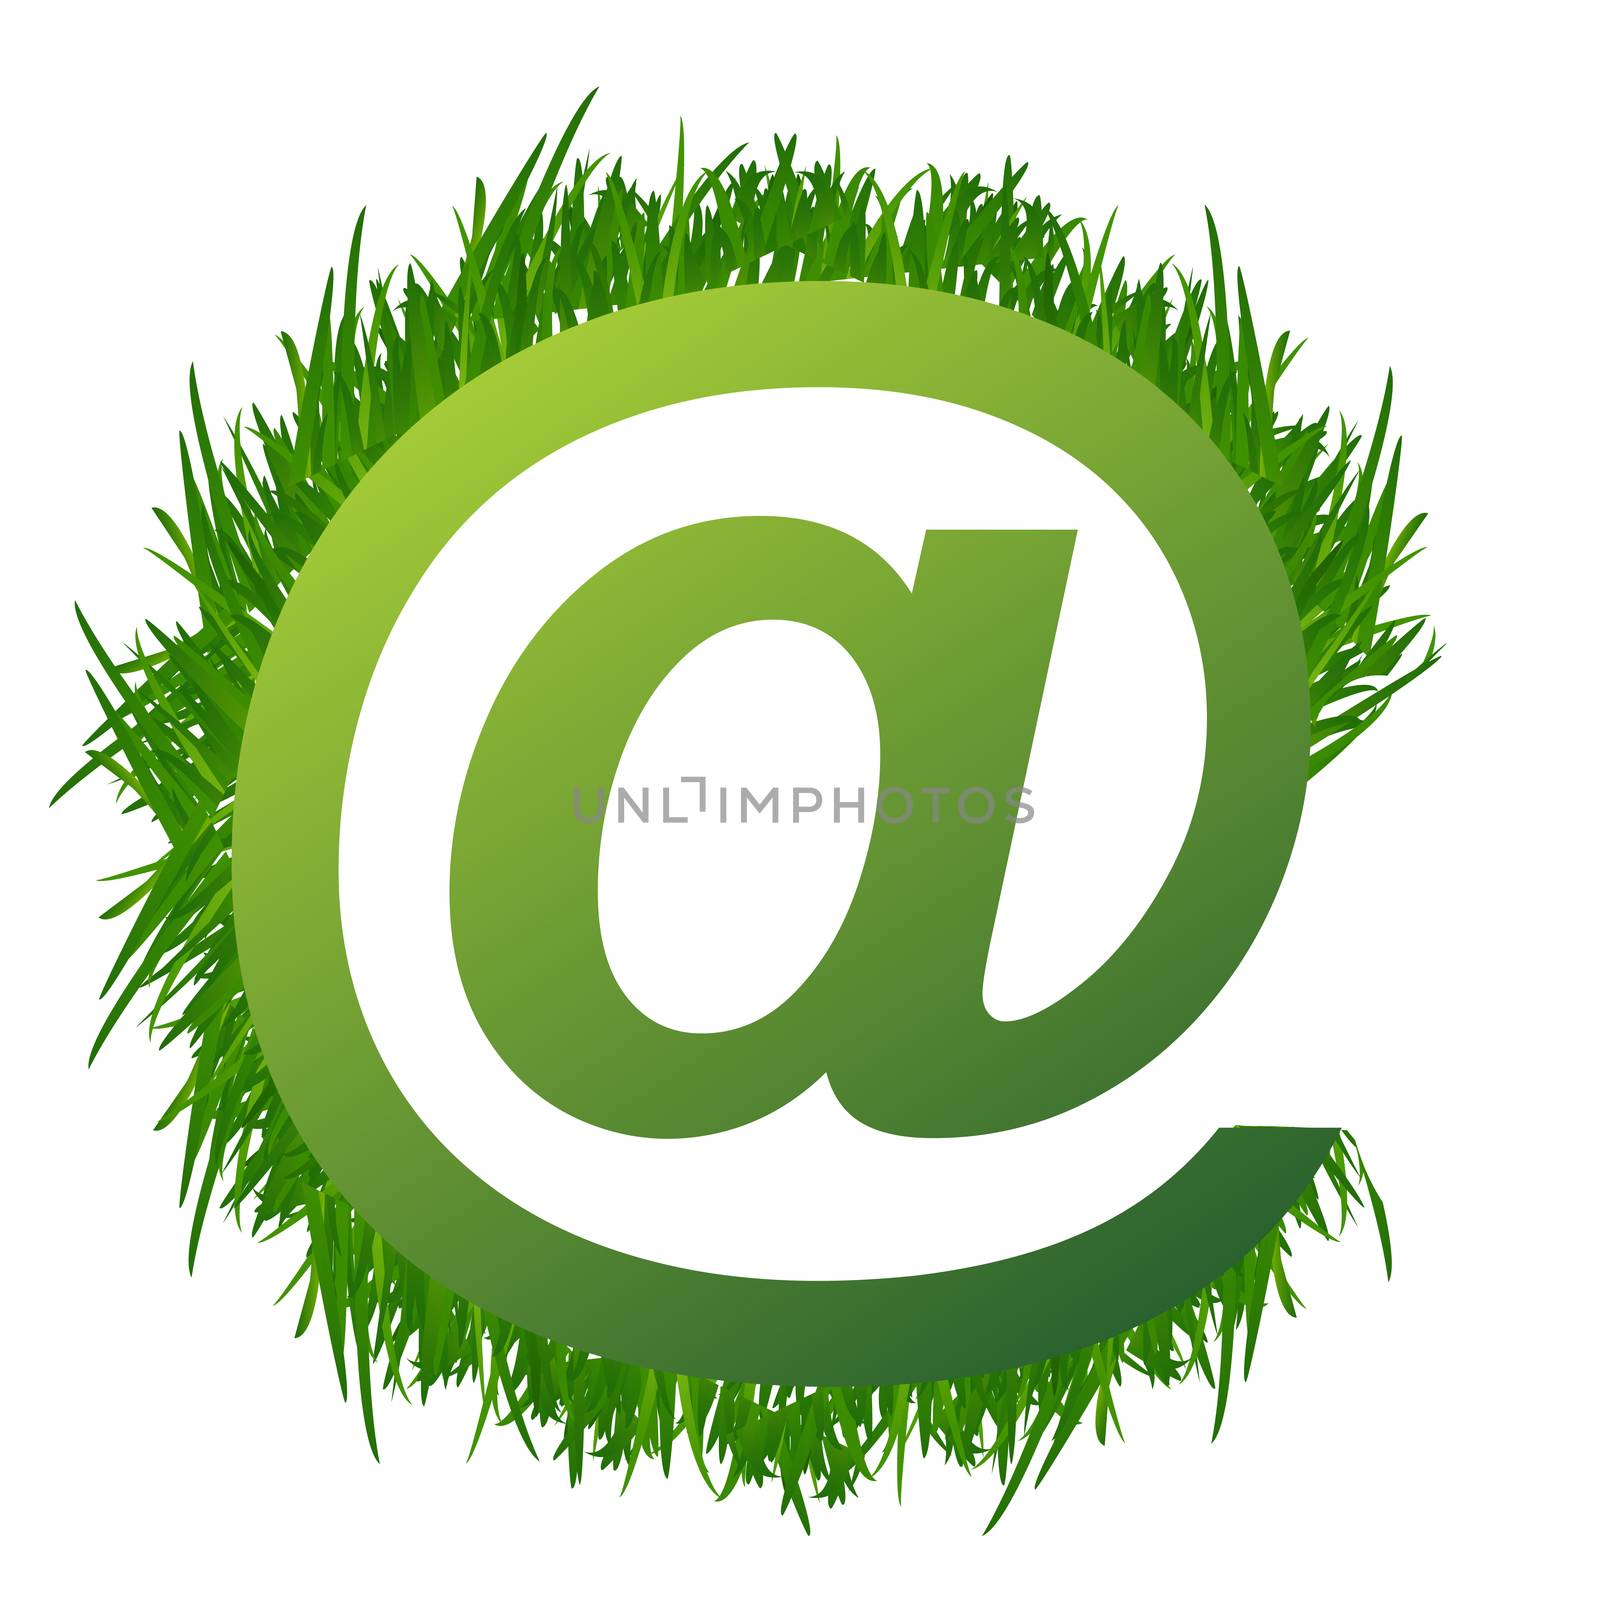 grass at sign illustration design on white by alexmillos